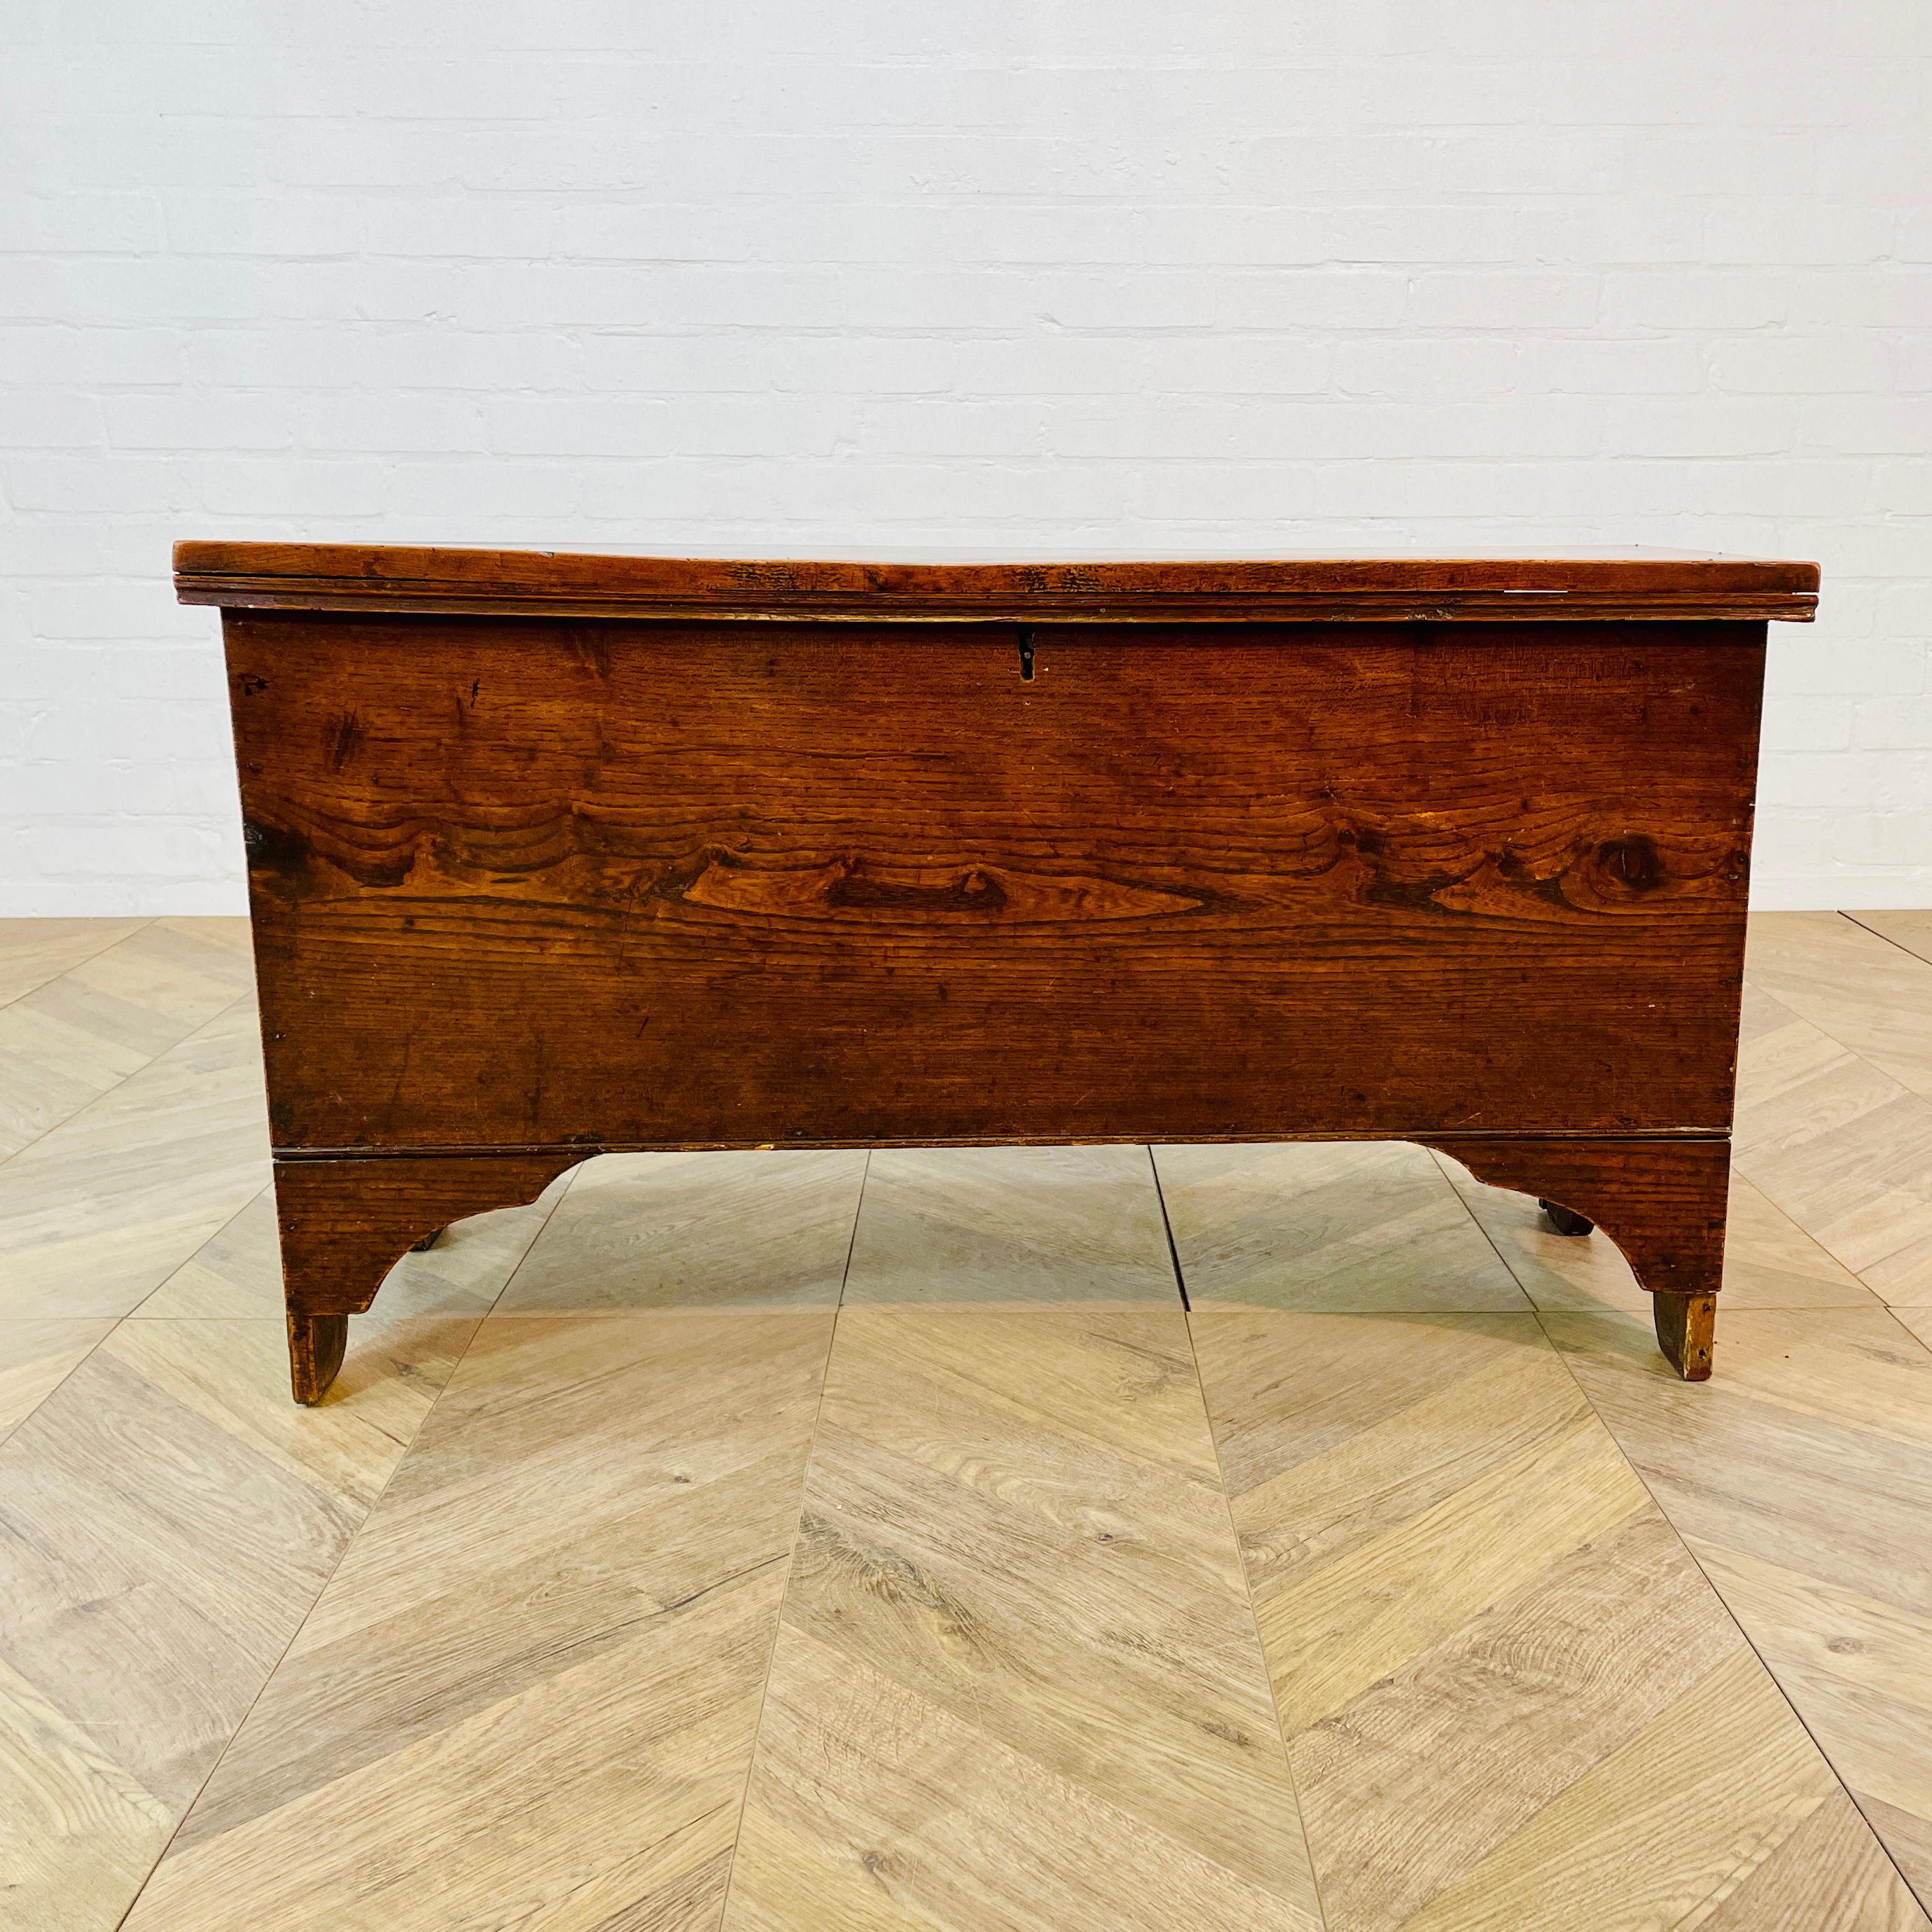 A Beautifully Simple English Antique Coffer or Trunk, circa 1830s.

The trunk, made from elm, has a a hinged lid and a good amount of storage inside.

In good antique condition, it does have general wear and scuffs in-keeping with its age and usage,